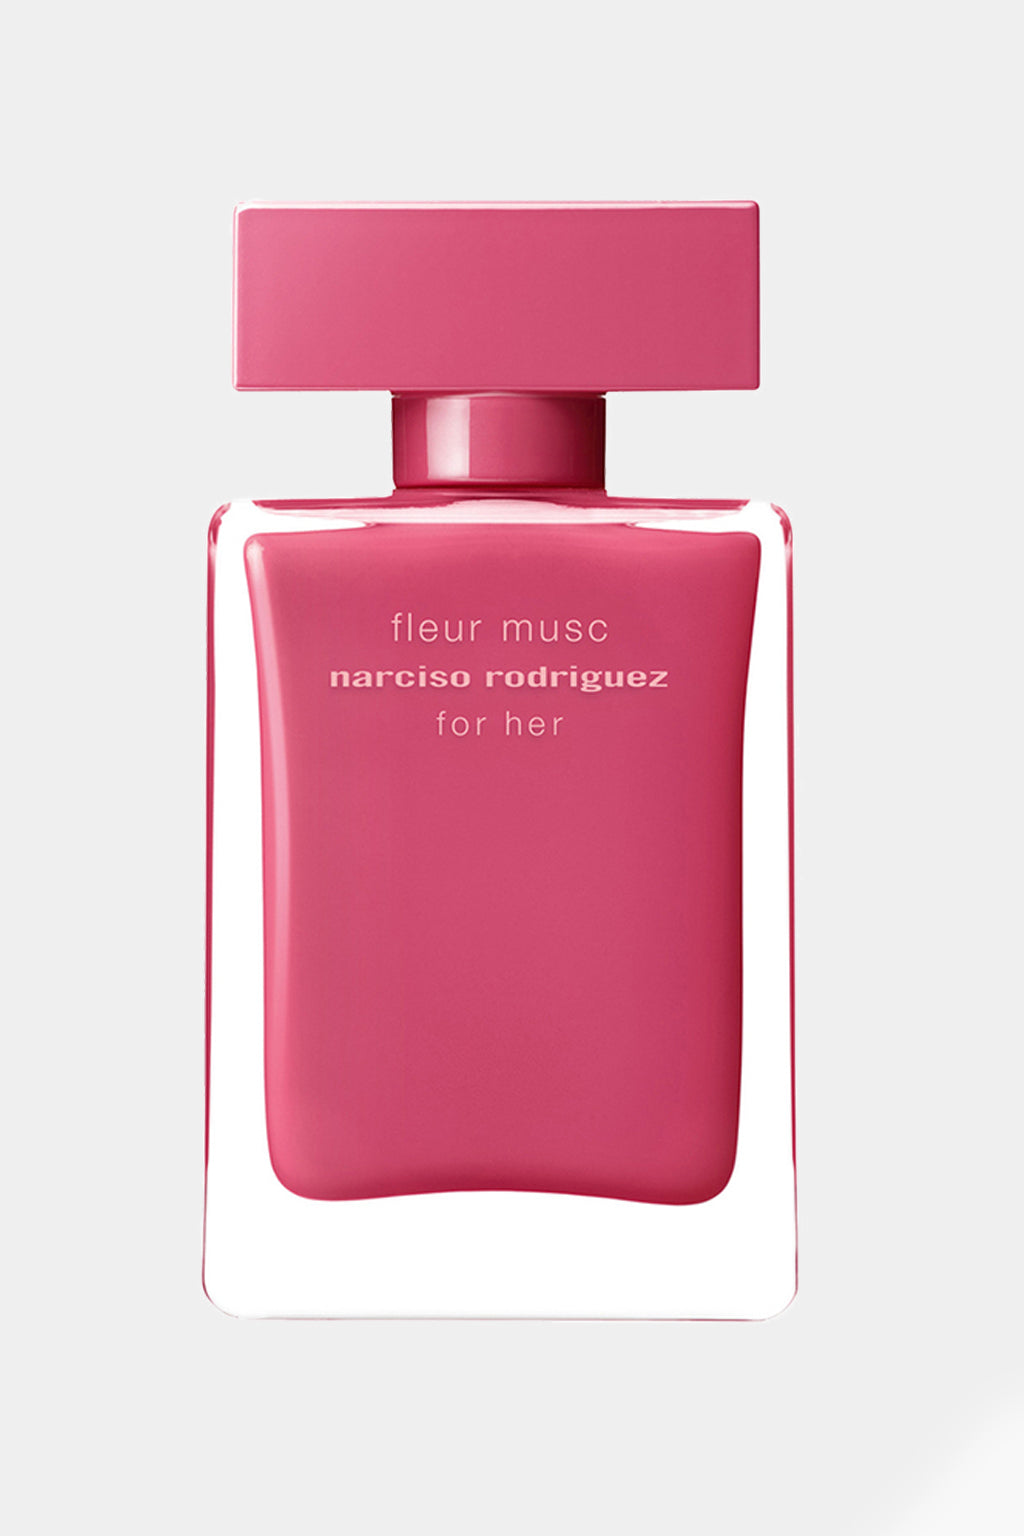 Narciso Rodriguez - Fleur Musc for Her Edp Spray 100ml